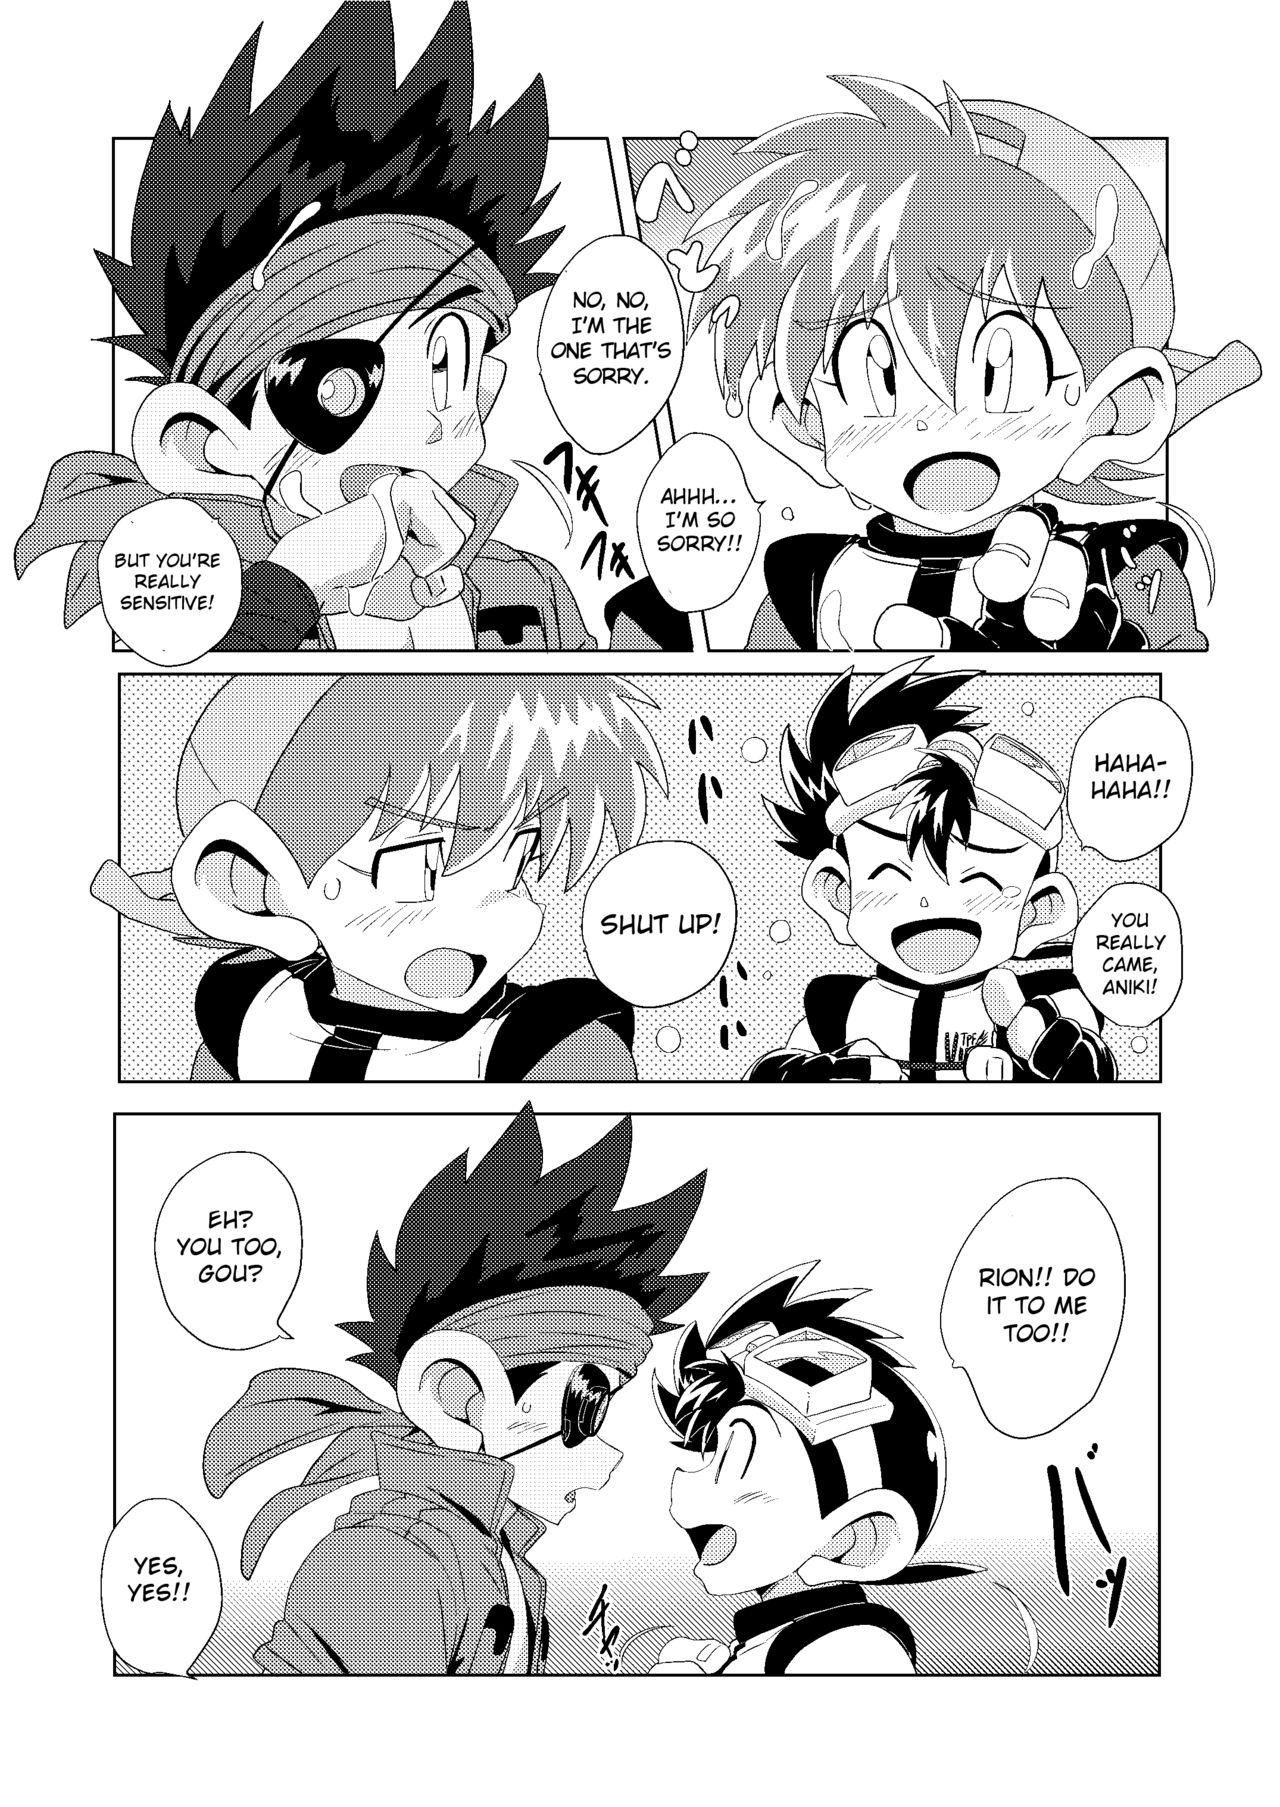 Chubby Chase the Wind - Bakusou kyoudai lets and go Eng Sub - Page 6